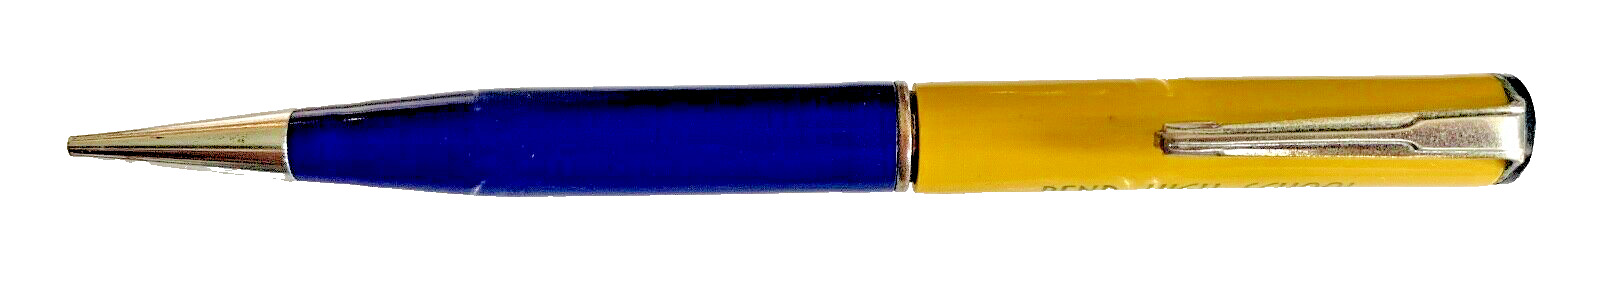 VINTAGE RITEPOINT ADVERTISING MECHANICAL PENCIL, BLUE / YELLOW & CHROME, 1950'S